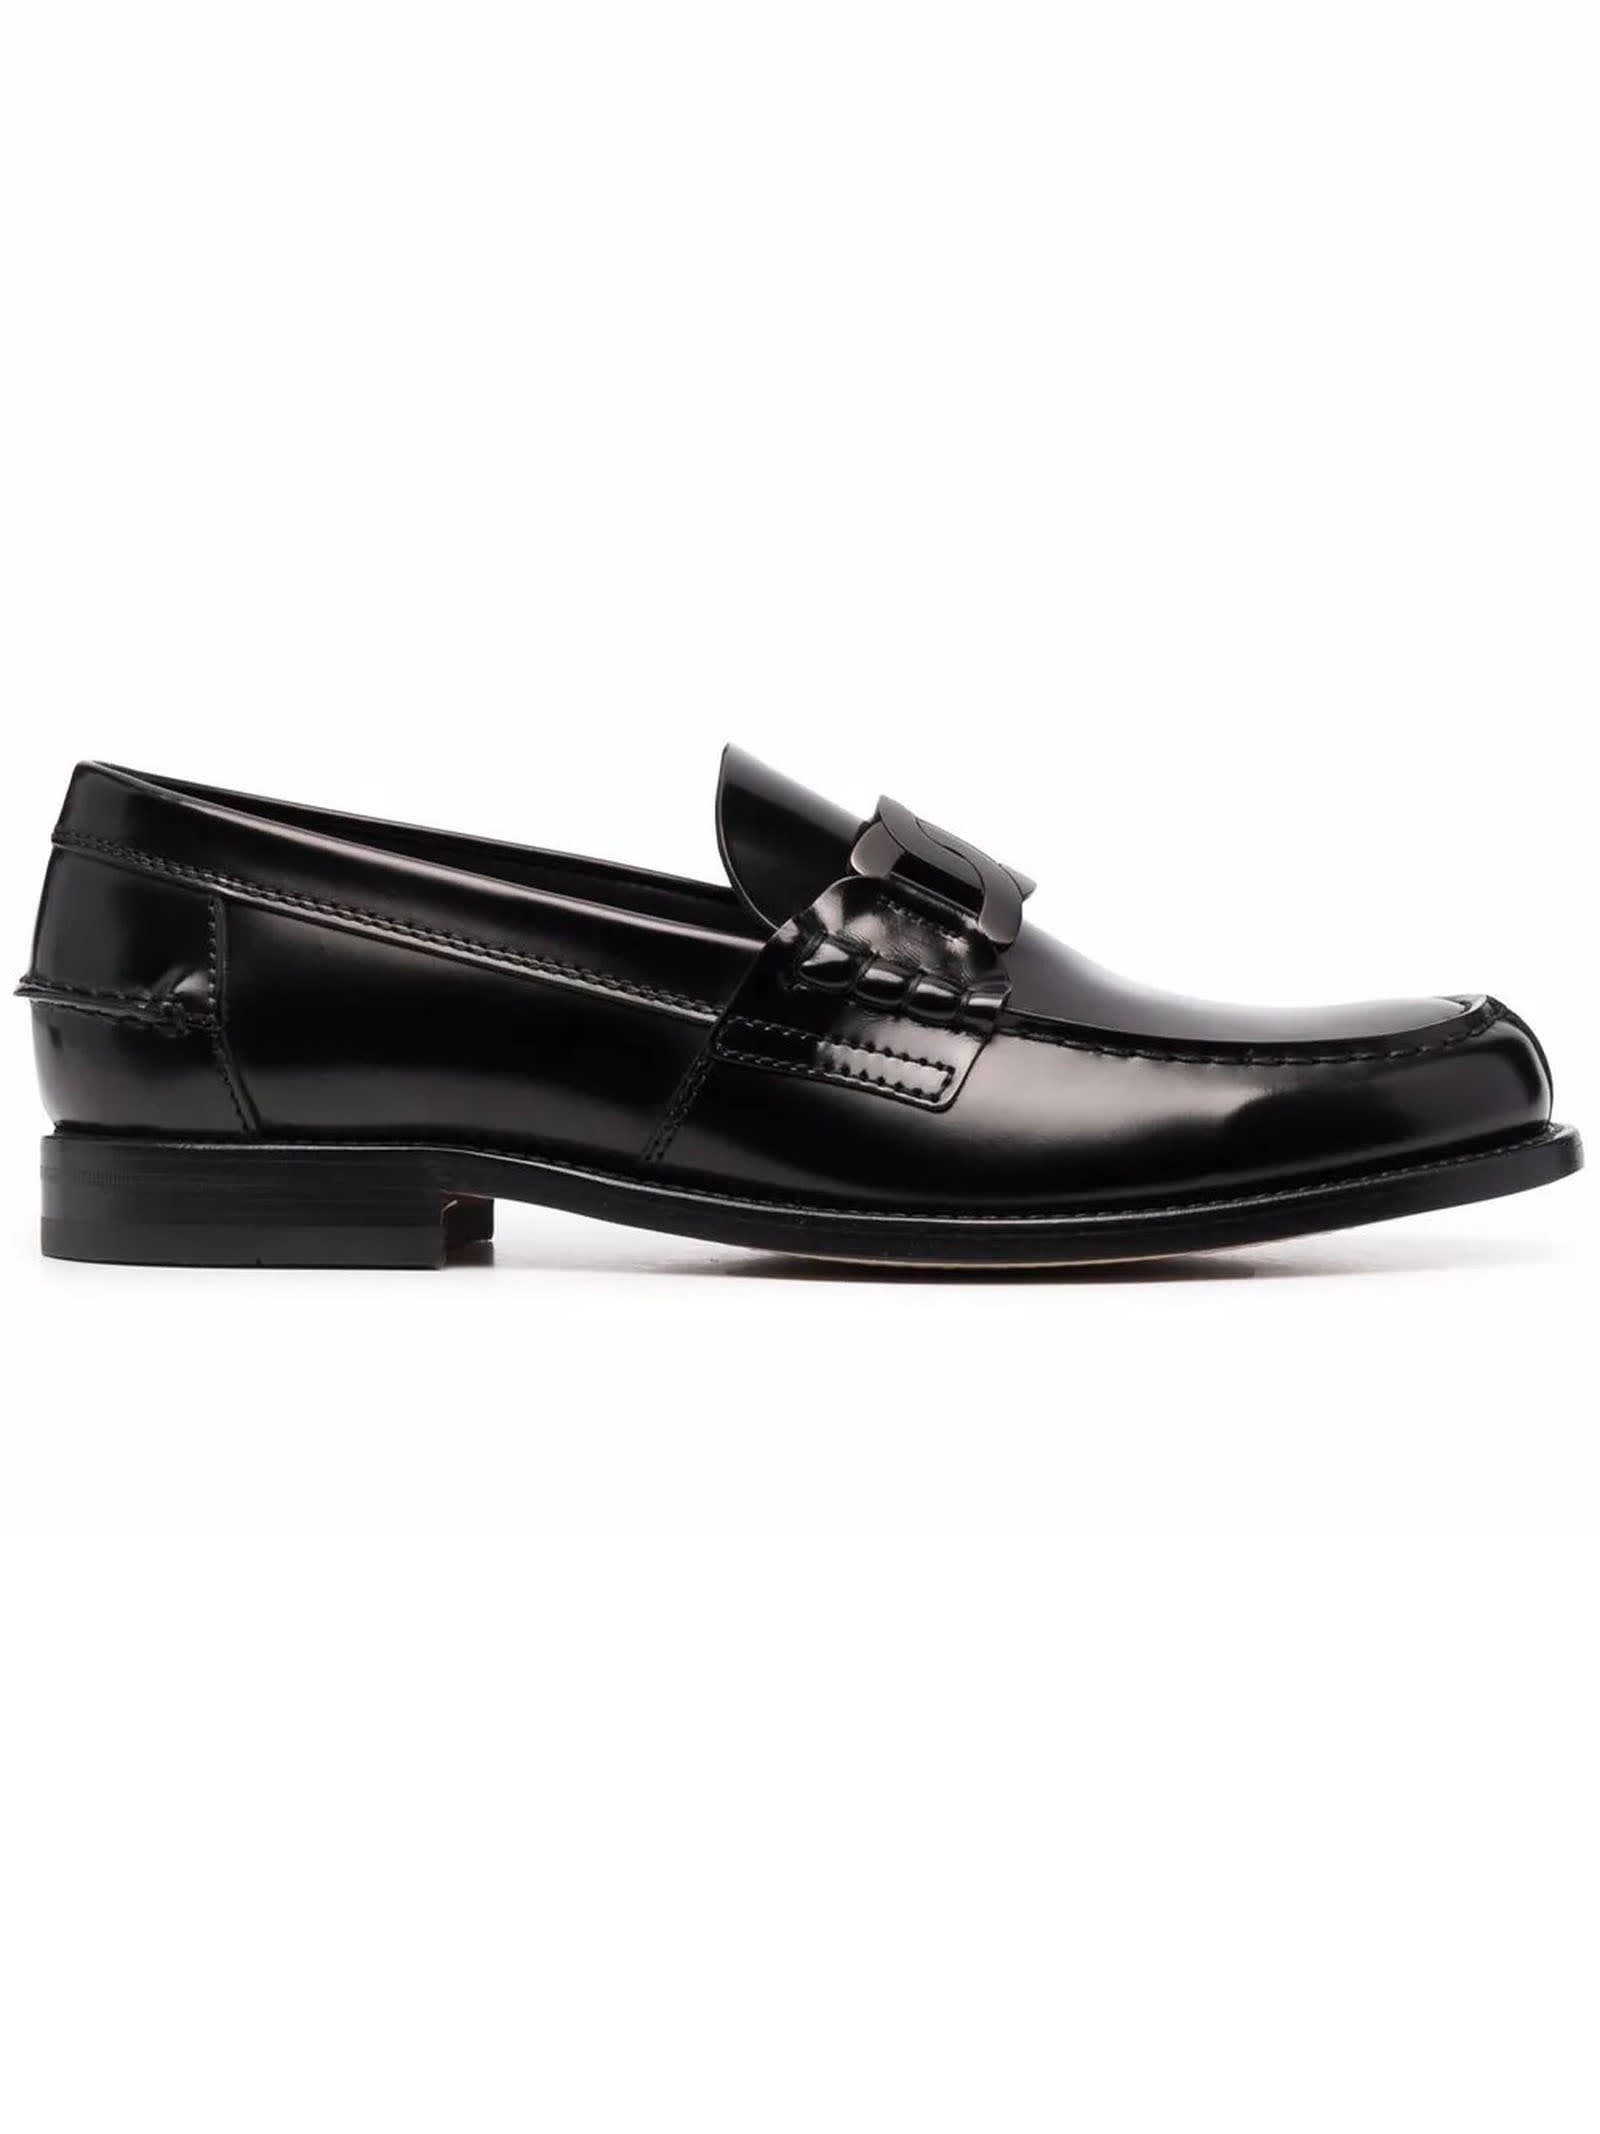 Tods Flat Shoes Black